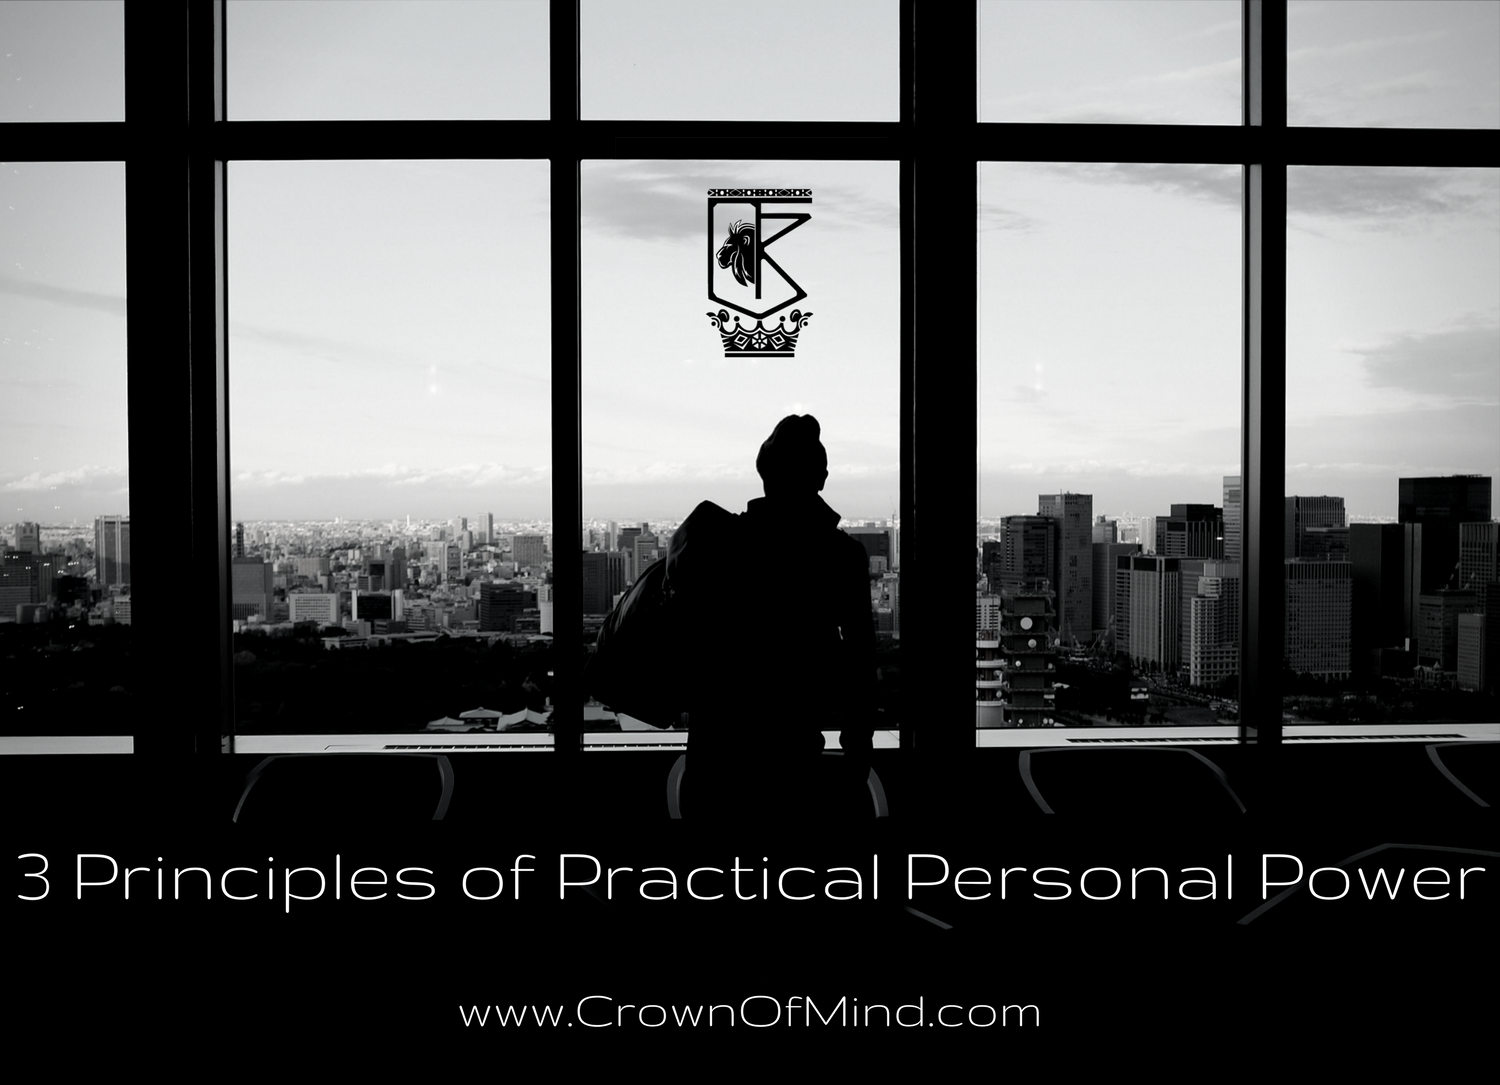 3 Principles of Practical Personal Power